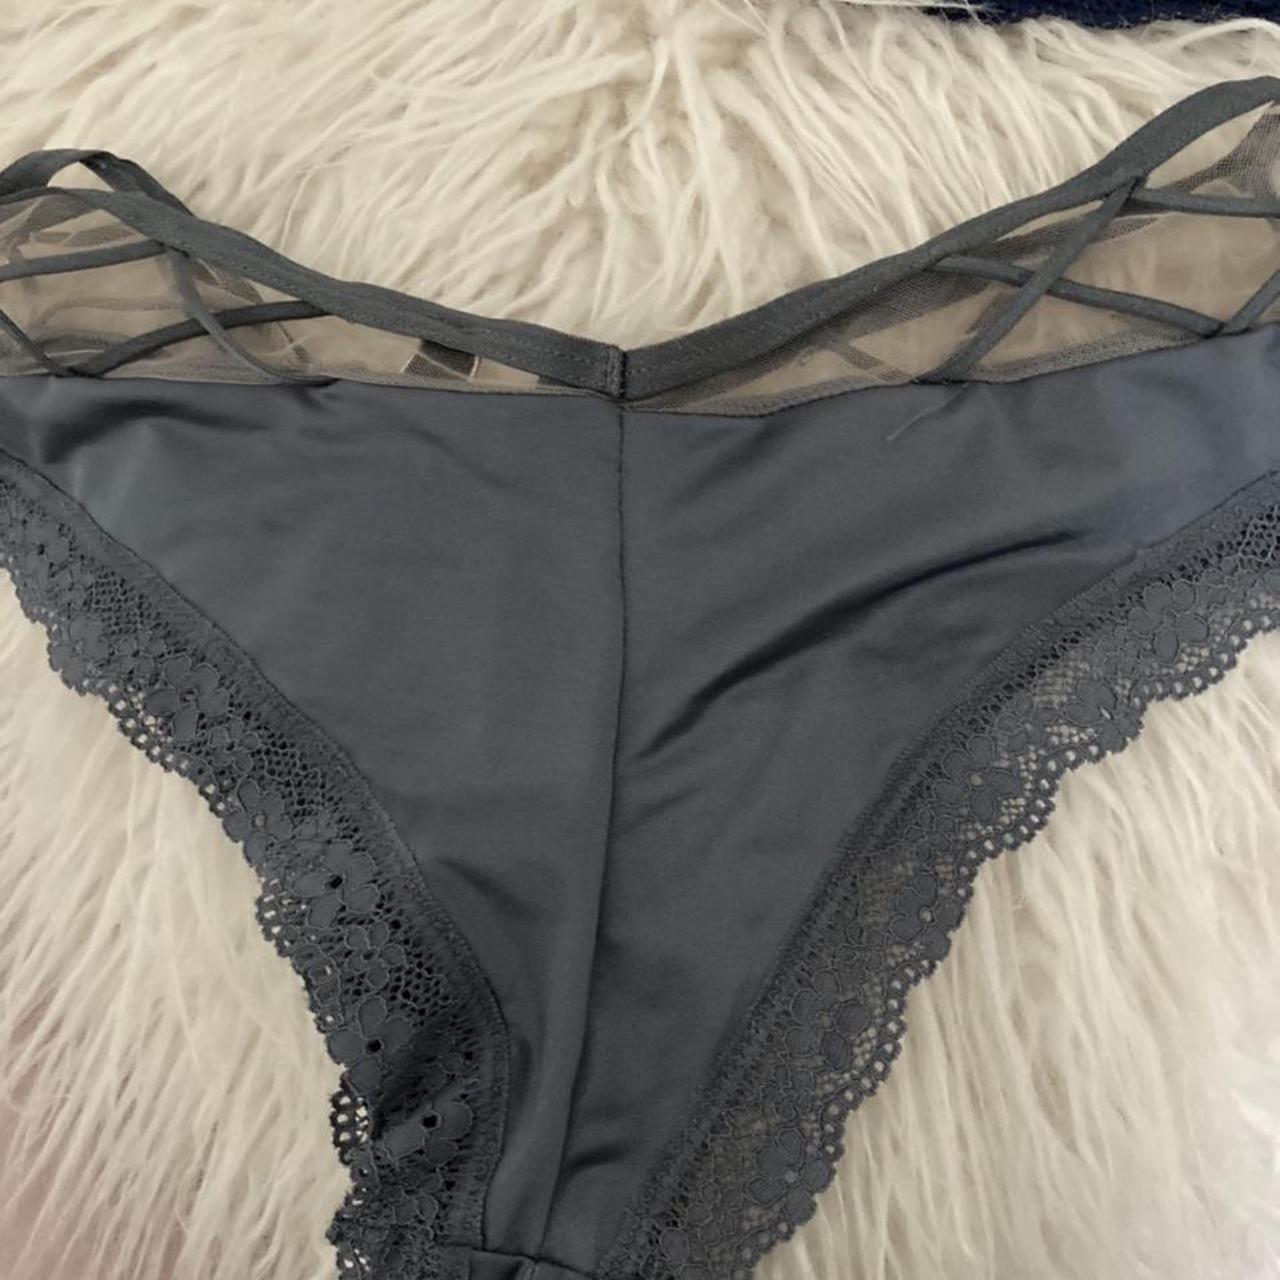 Victoria Secrets knickers 3 pairs XS too small never - Depop